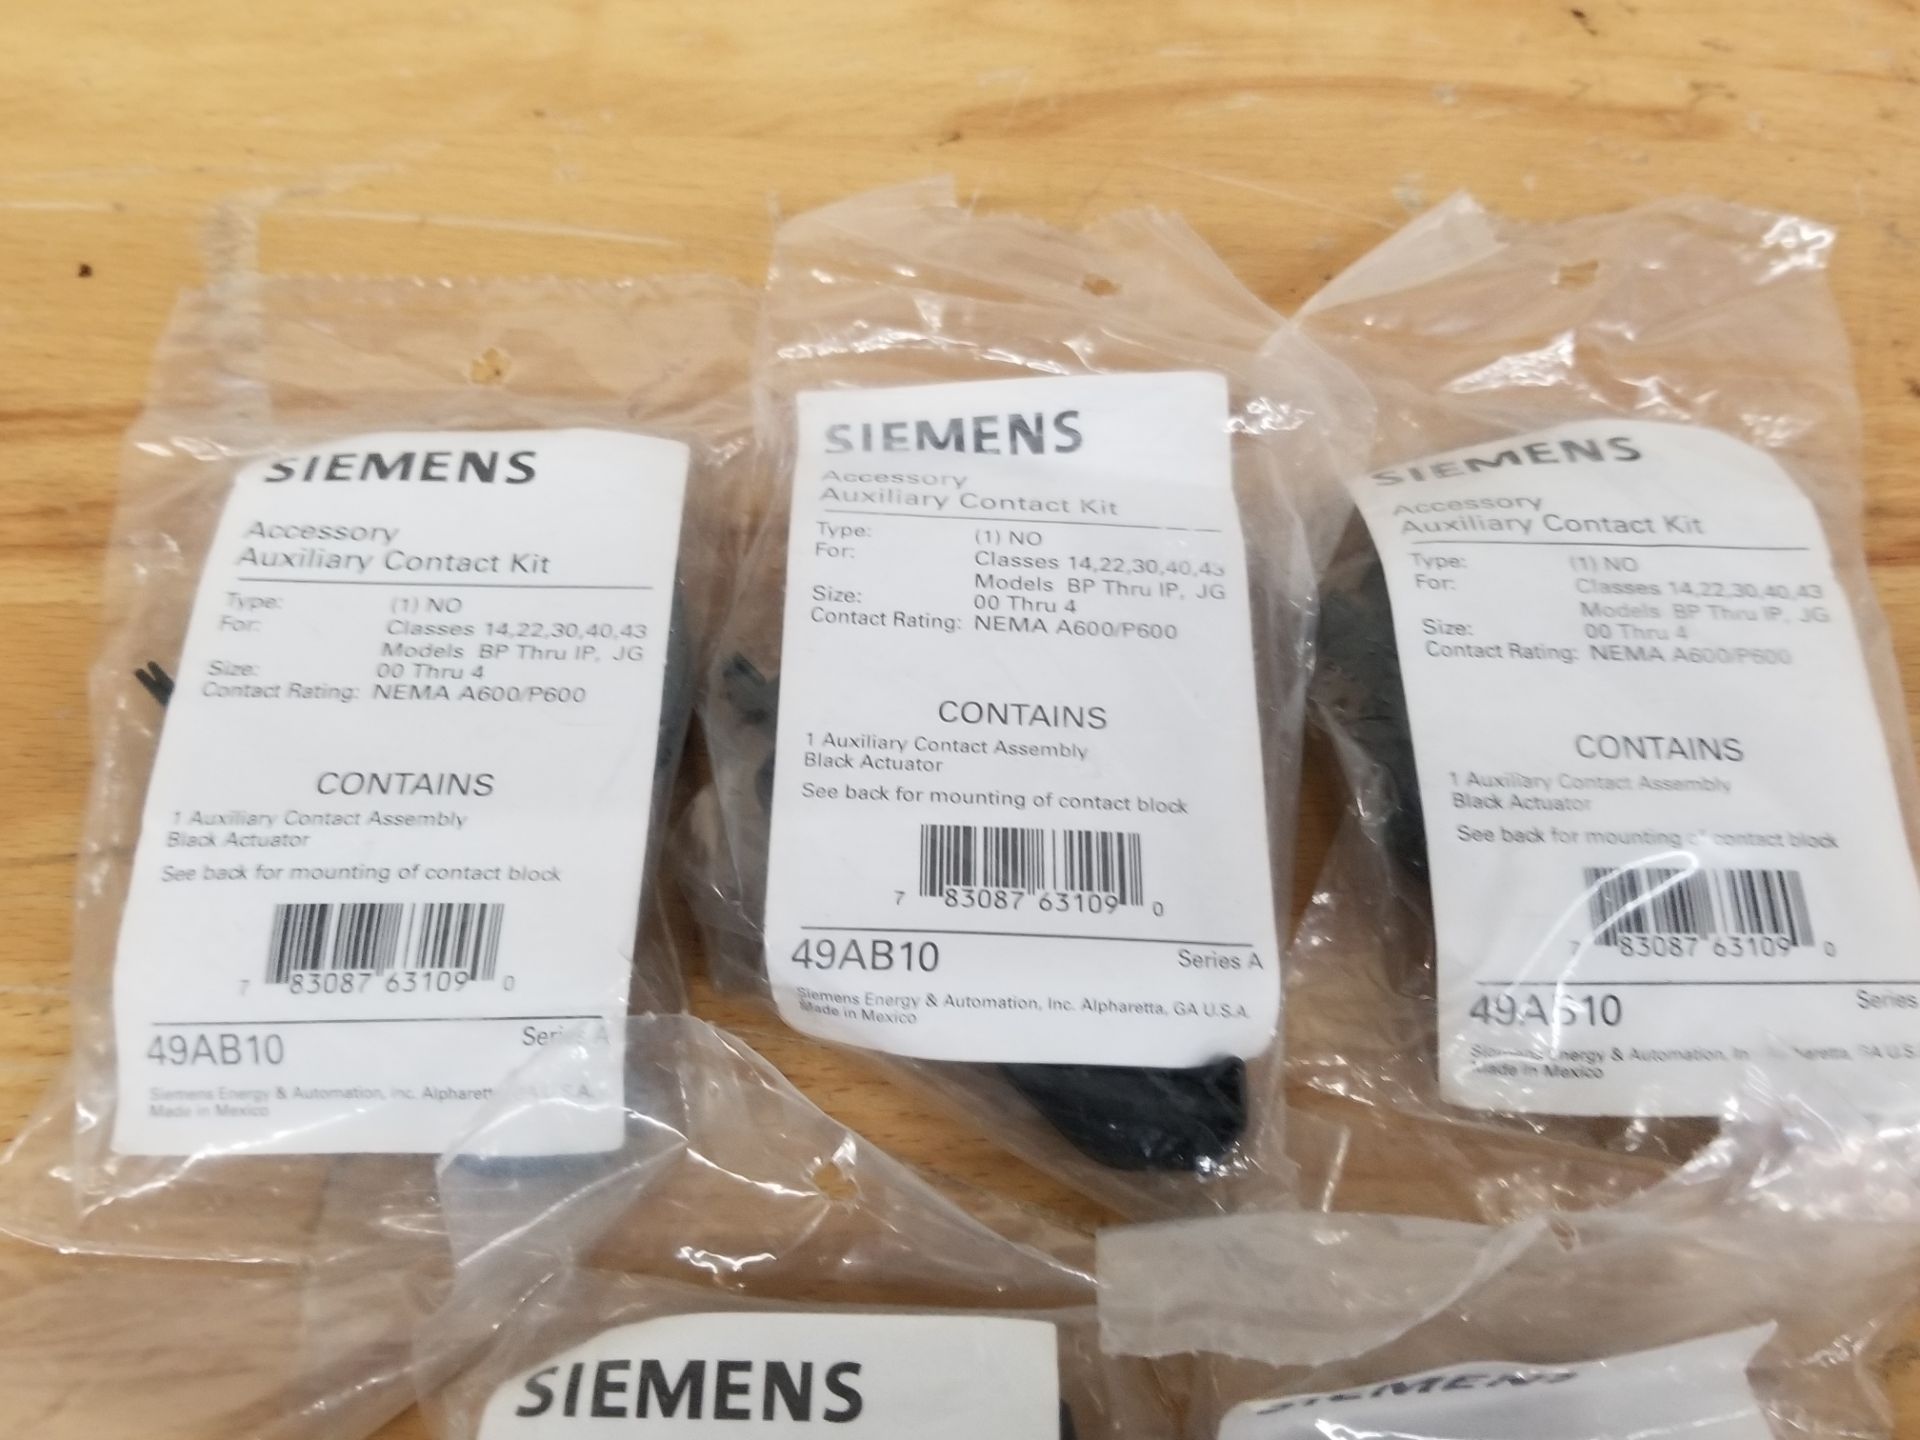 LOT OF NEW SIEMENS AUXILIARY CONTACT BLOCK KITS - Image 3 of 5